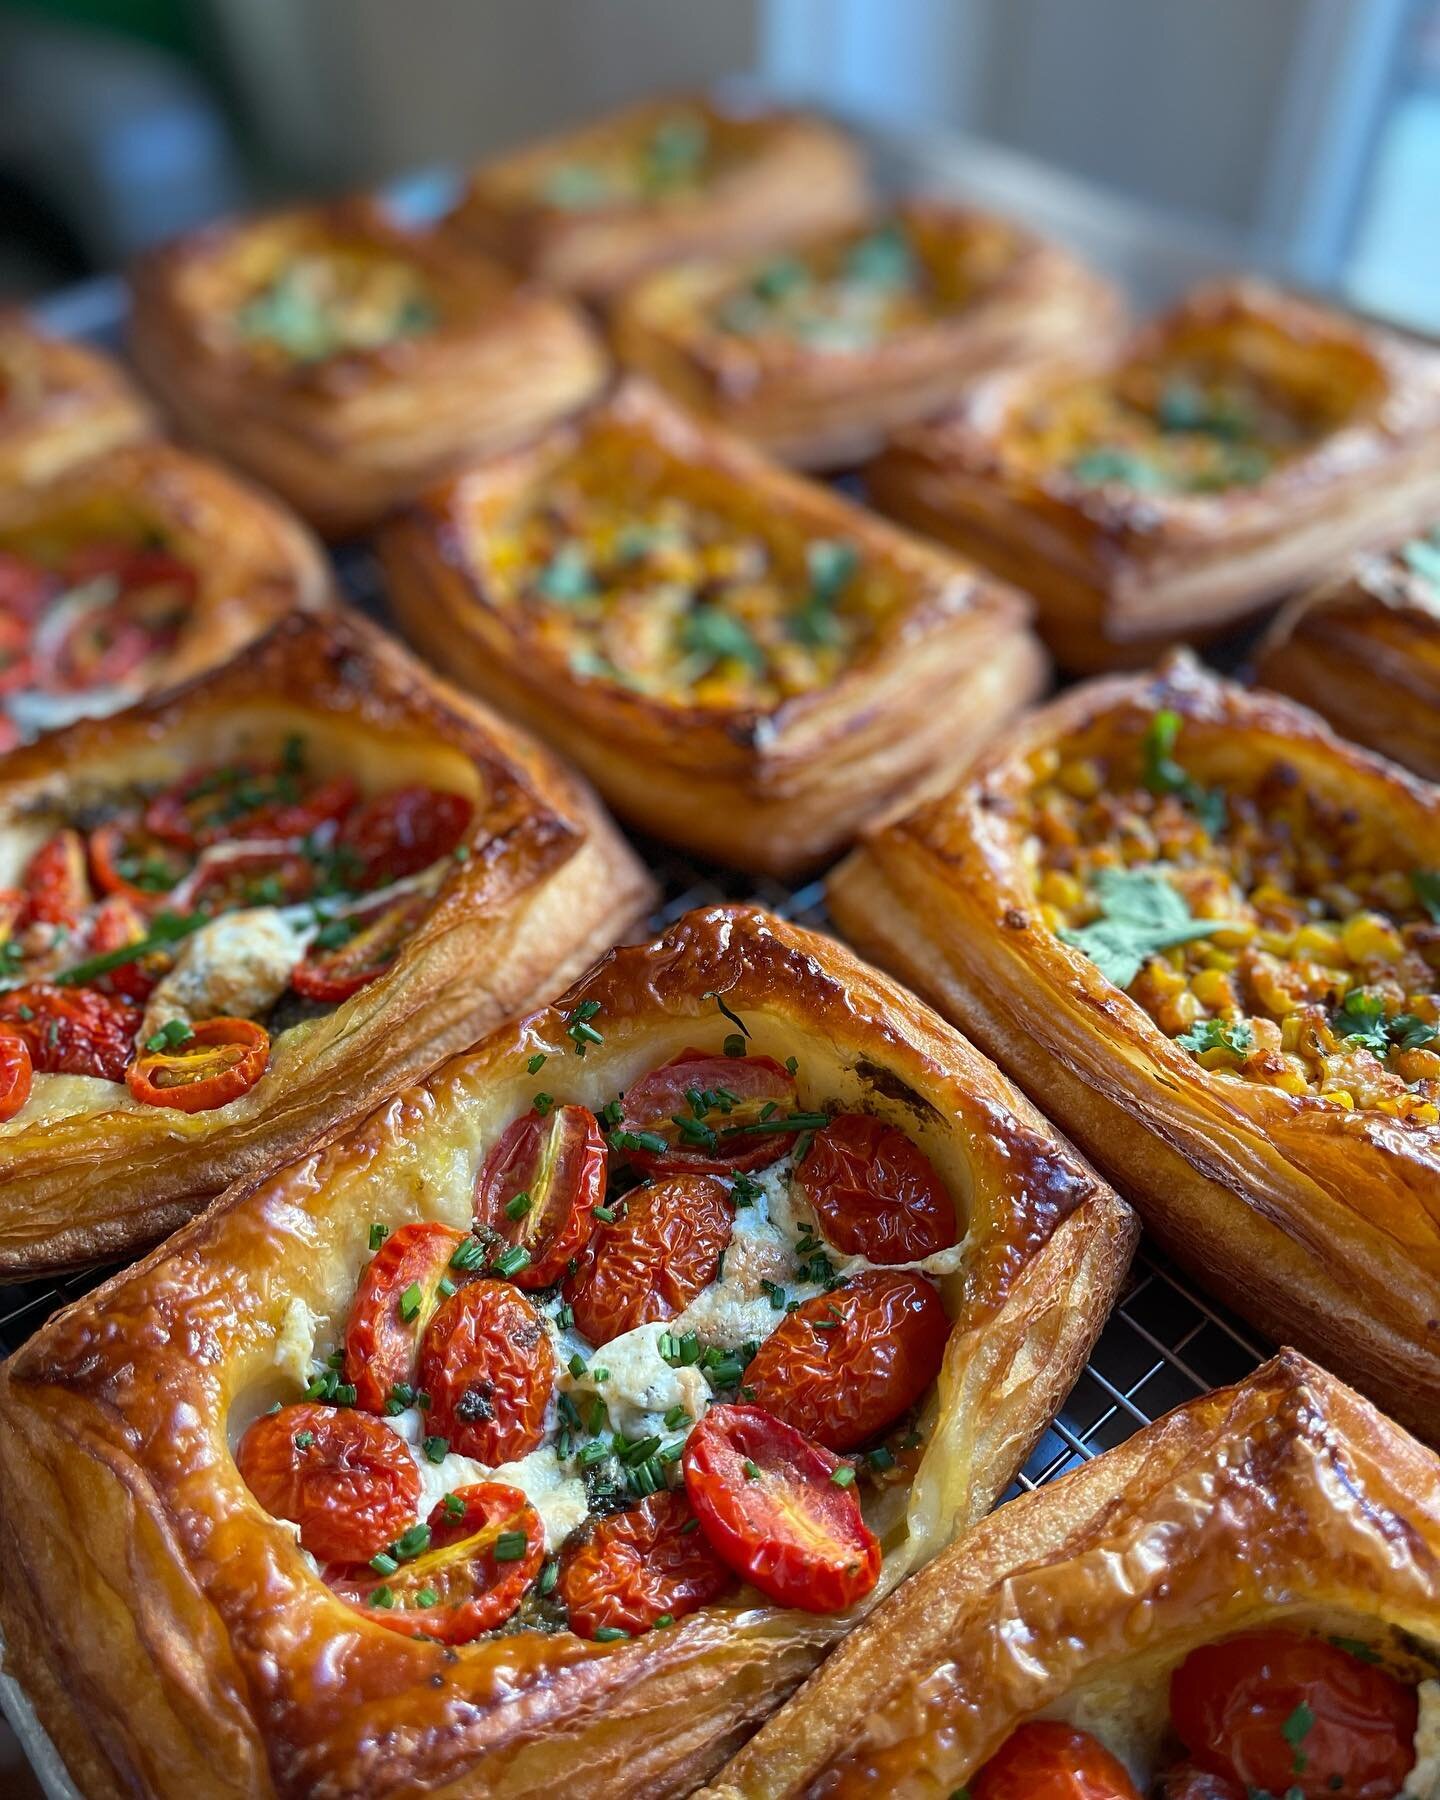 Mexican corn croissant tarts are baaack!
Here&rsquo;s our menu for this weekend:
-passion fruit raspberry donuts
-tiramisu cake by the slice
-blackberry financiers
-Mexican corn croix tarts
-strawberry &amp; cream croix tarts
-all your faves
-see you